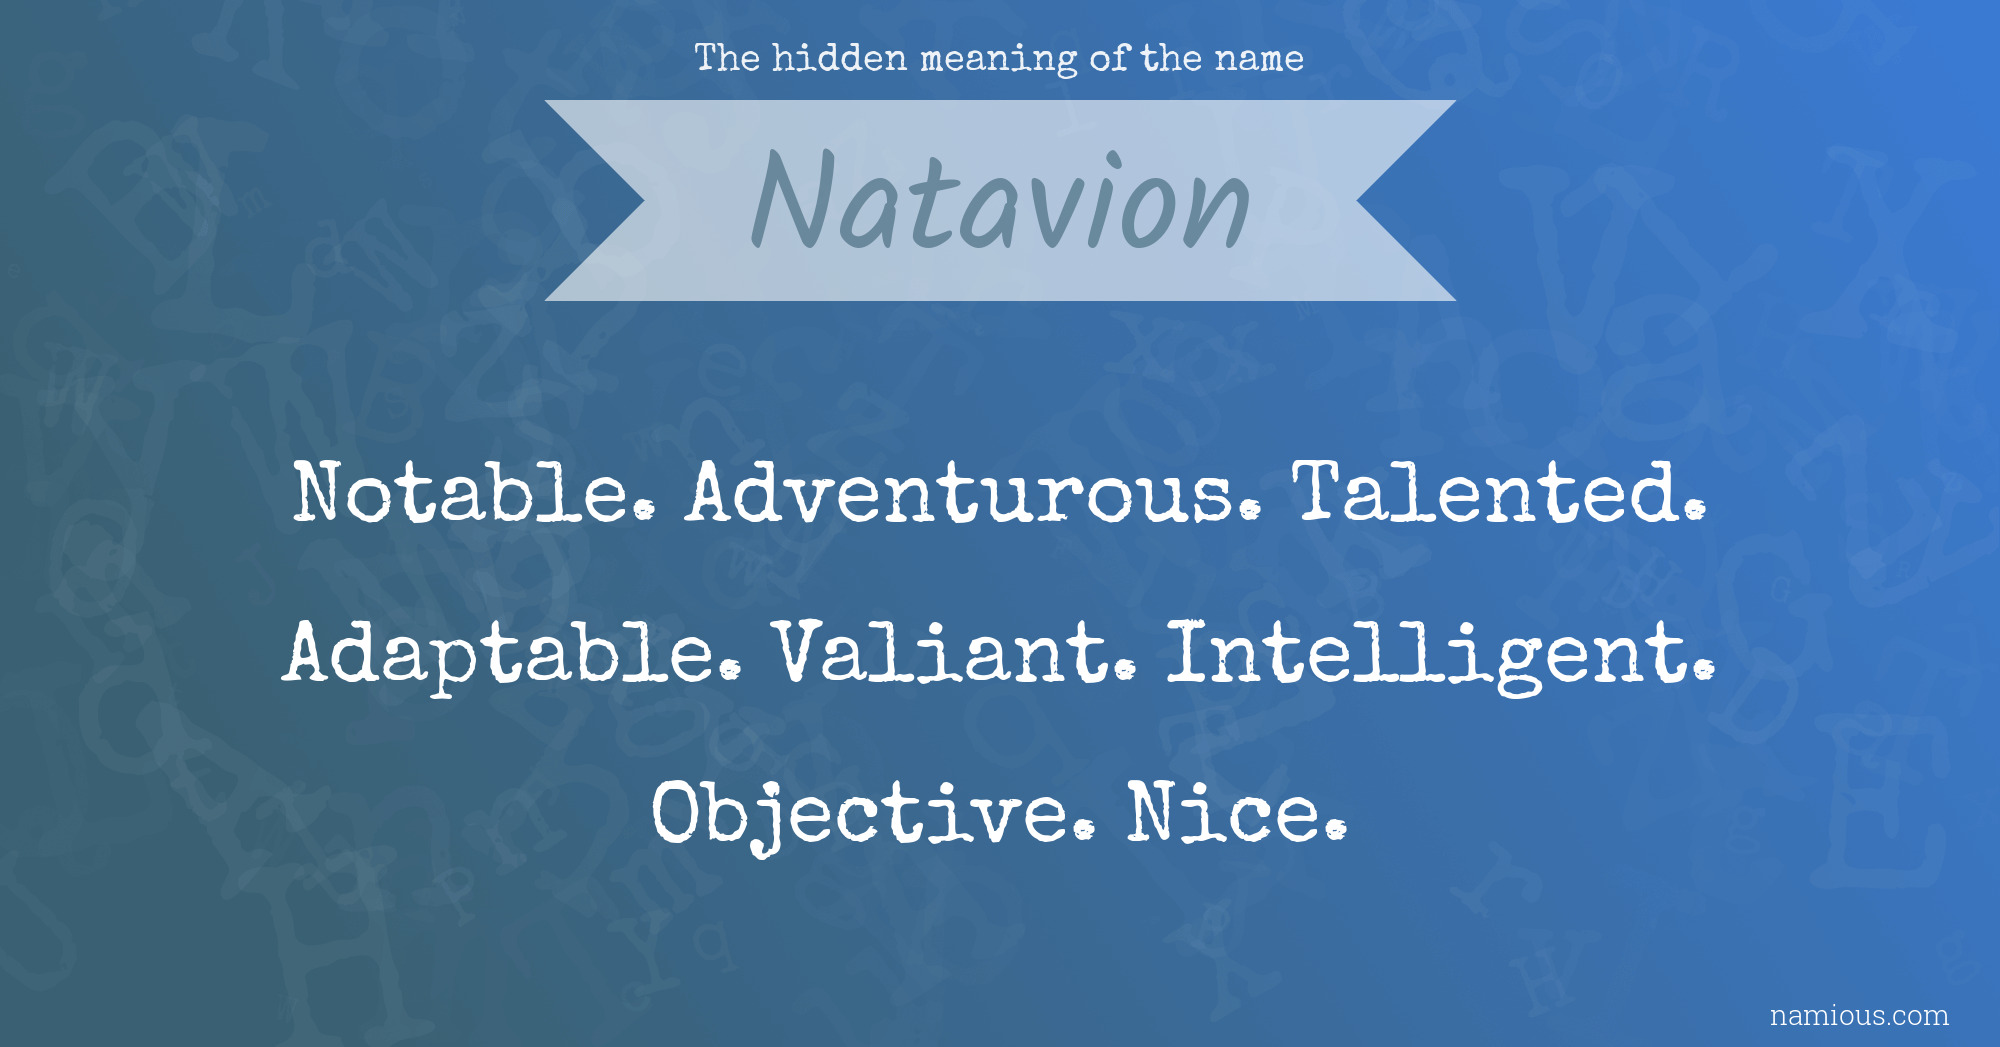 The hidden meaning of the name Natavion